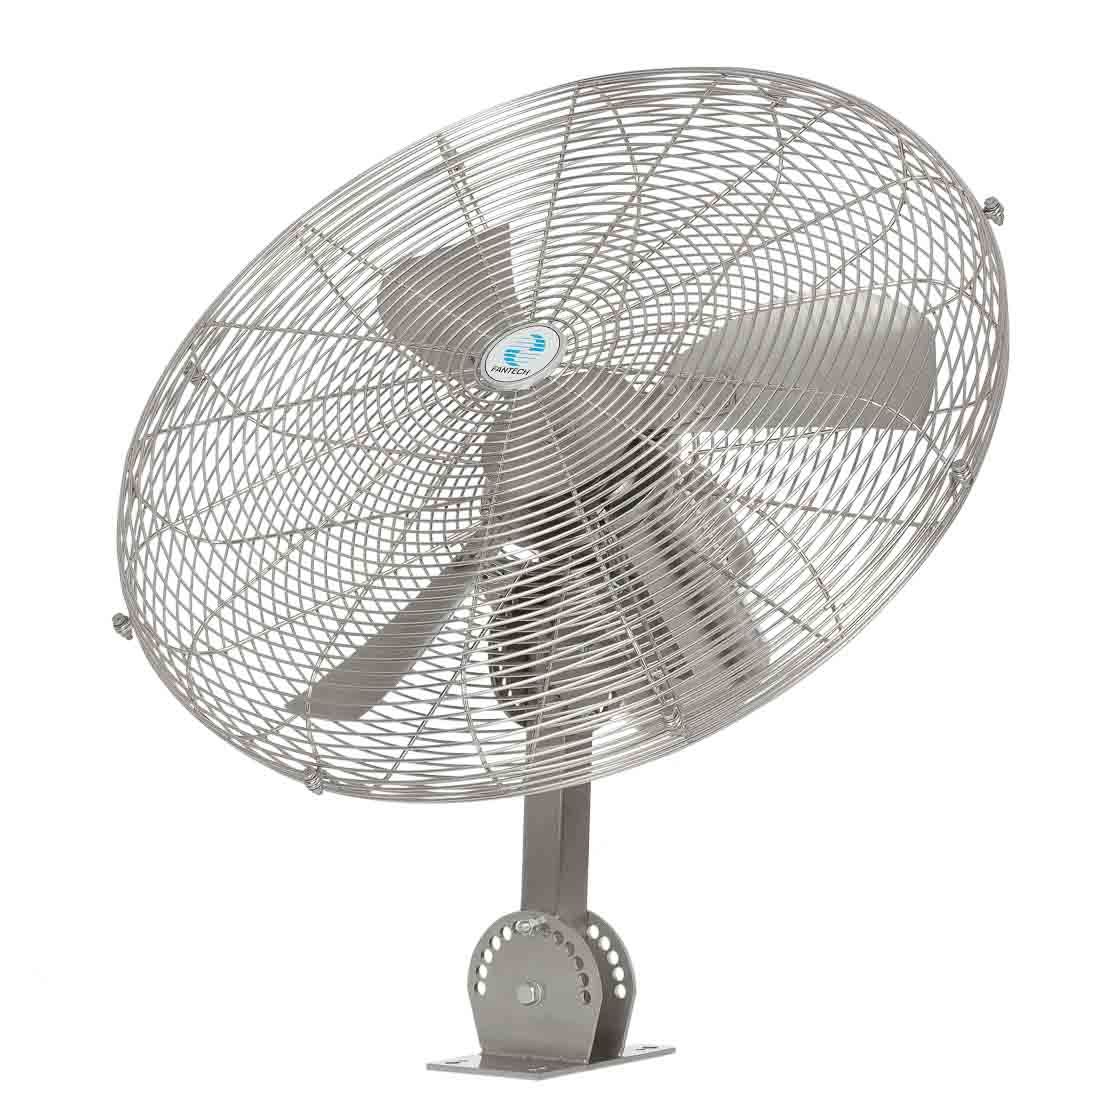 Industrial water and heat resistant fan_Fantech HYWY71B4 Angle view looking up6